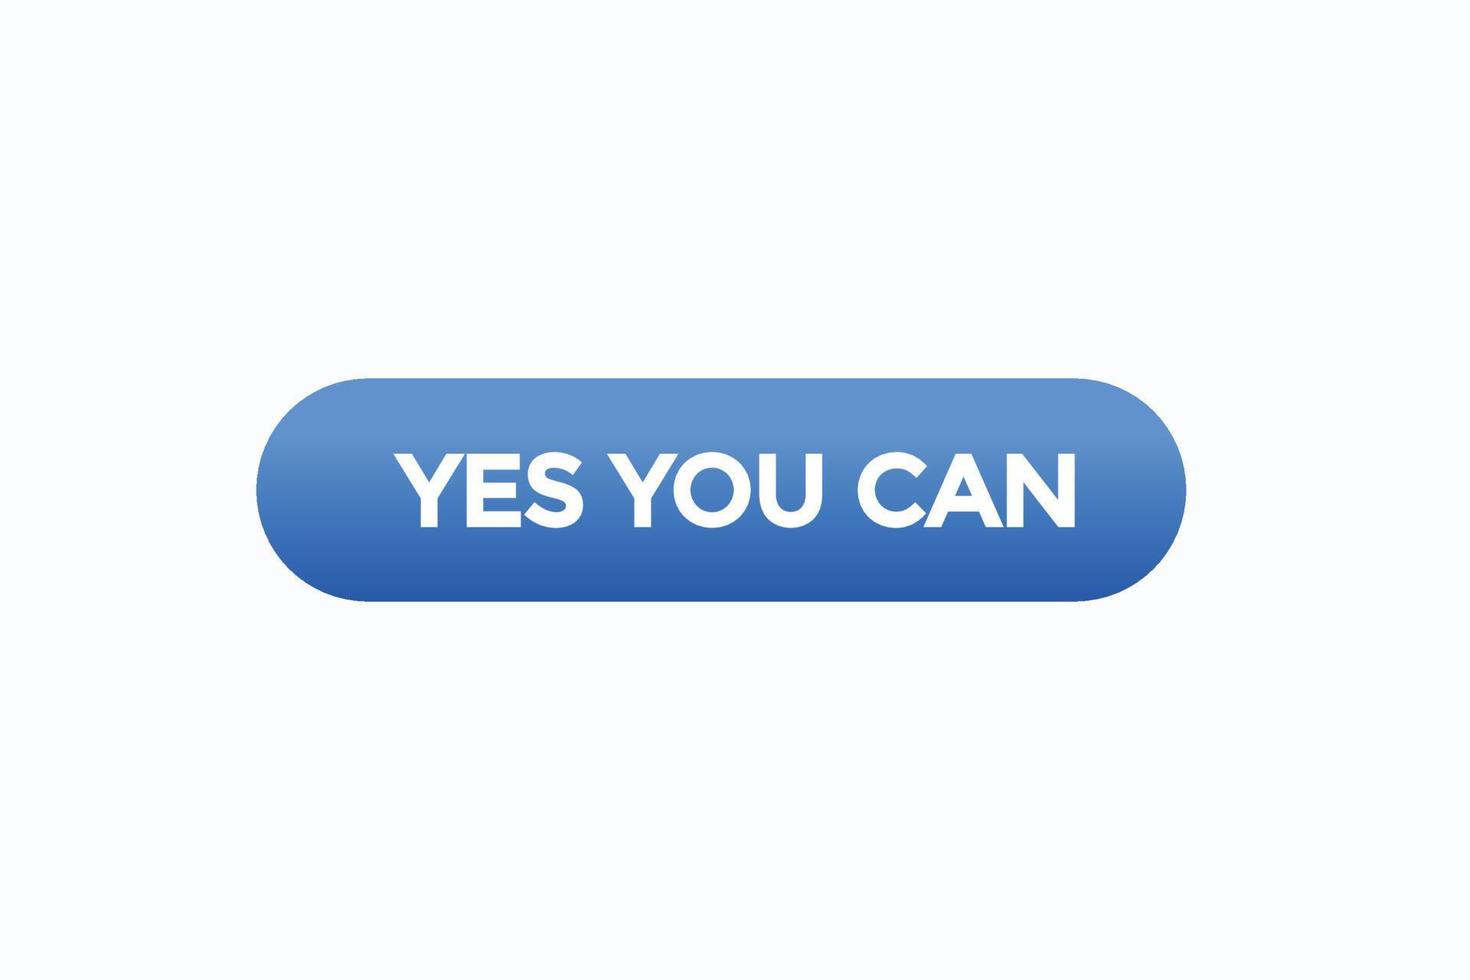 yes you can button vectors.sign label speech bubble yes you can vector